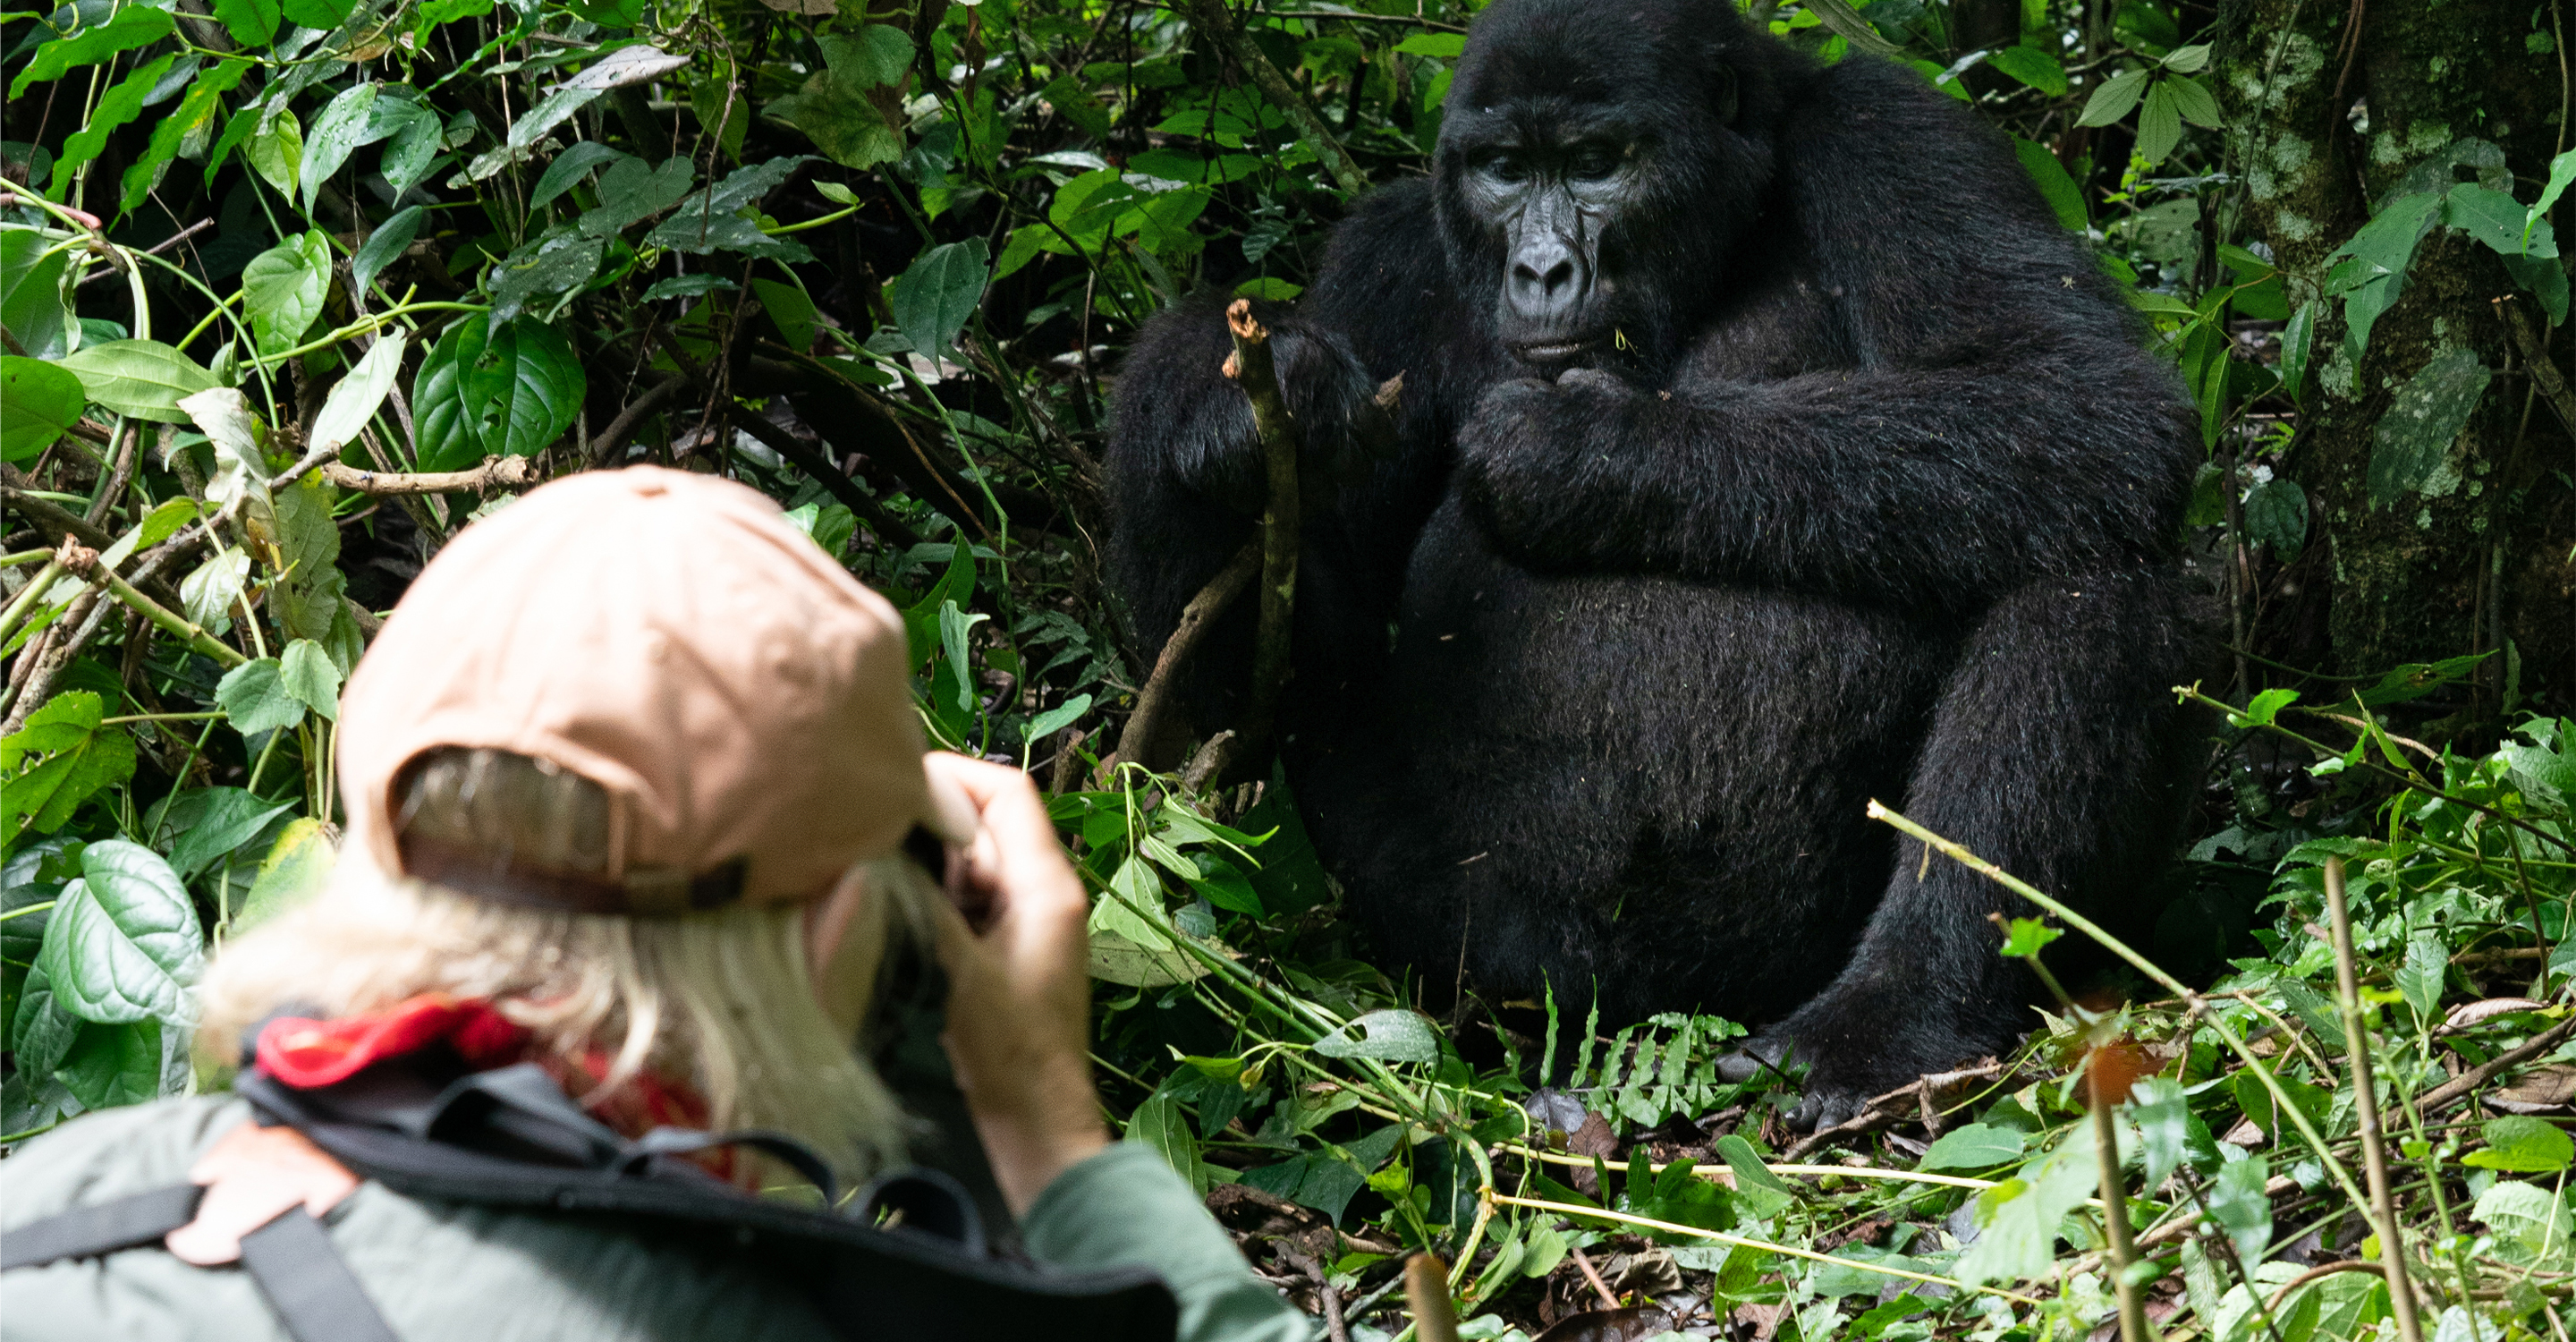 A traveler gets an up-close encounter while photographing a mother and baby mountain gorilla, Volcanoes National Park, Rwanda